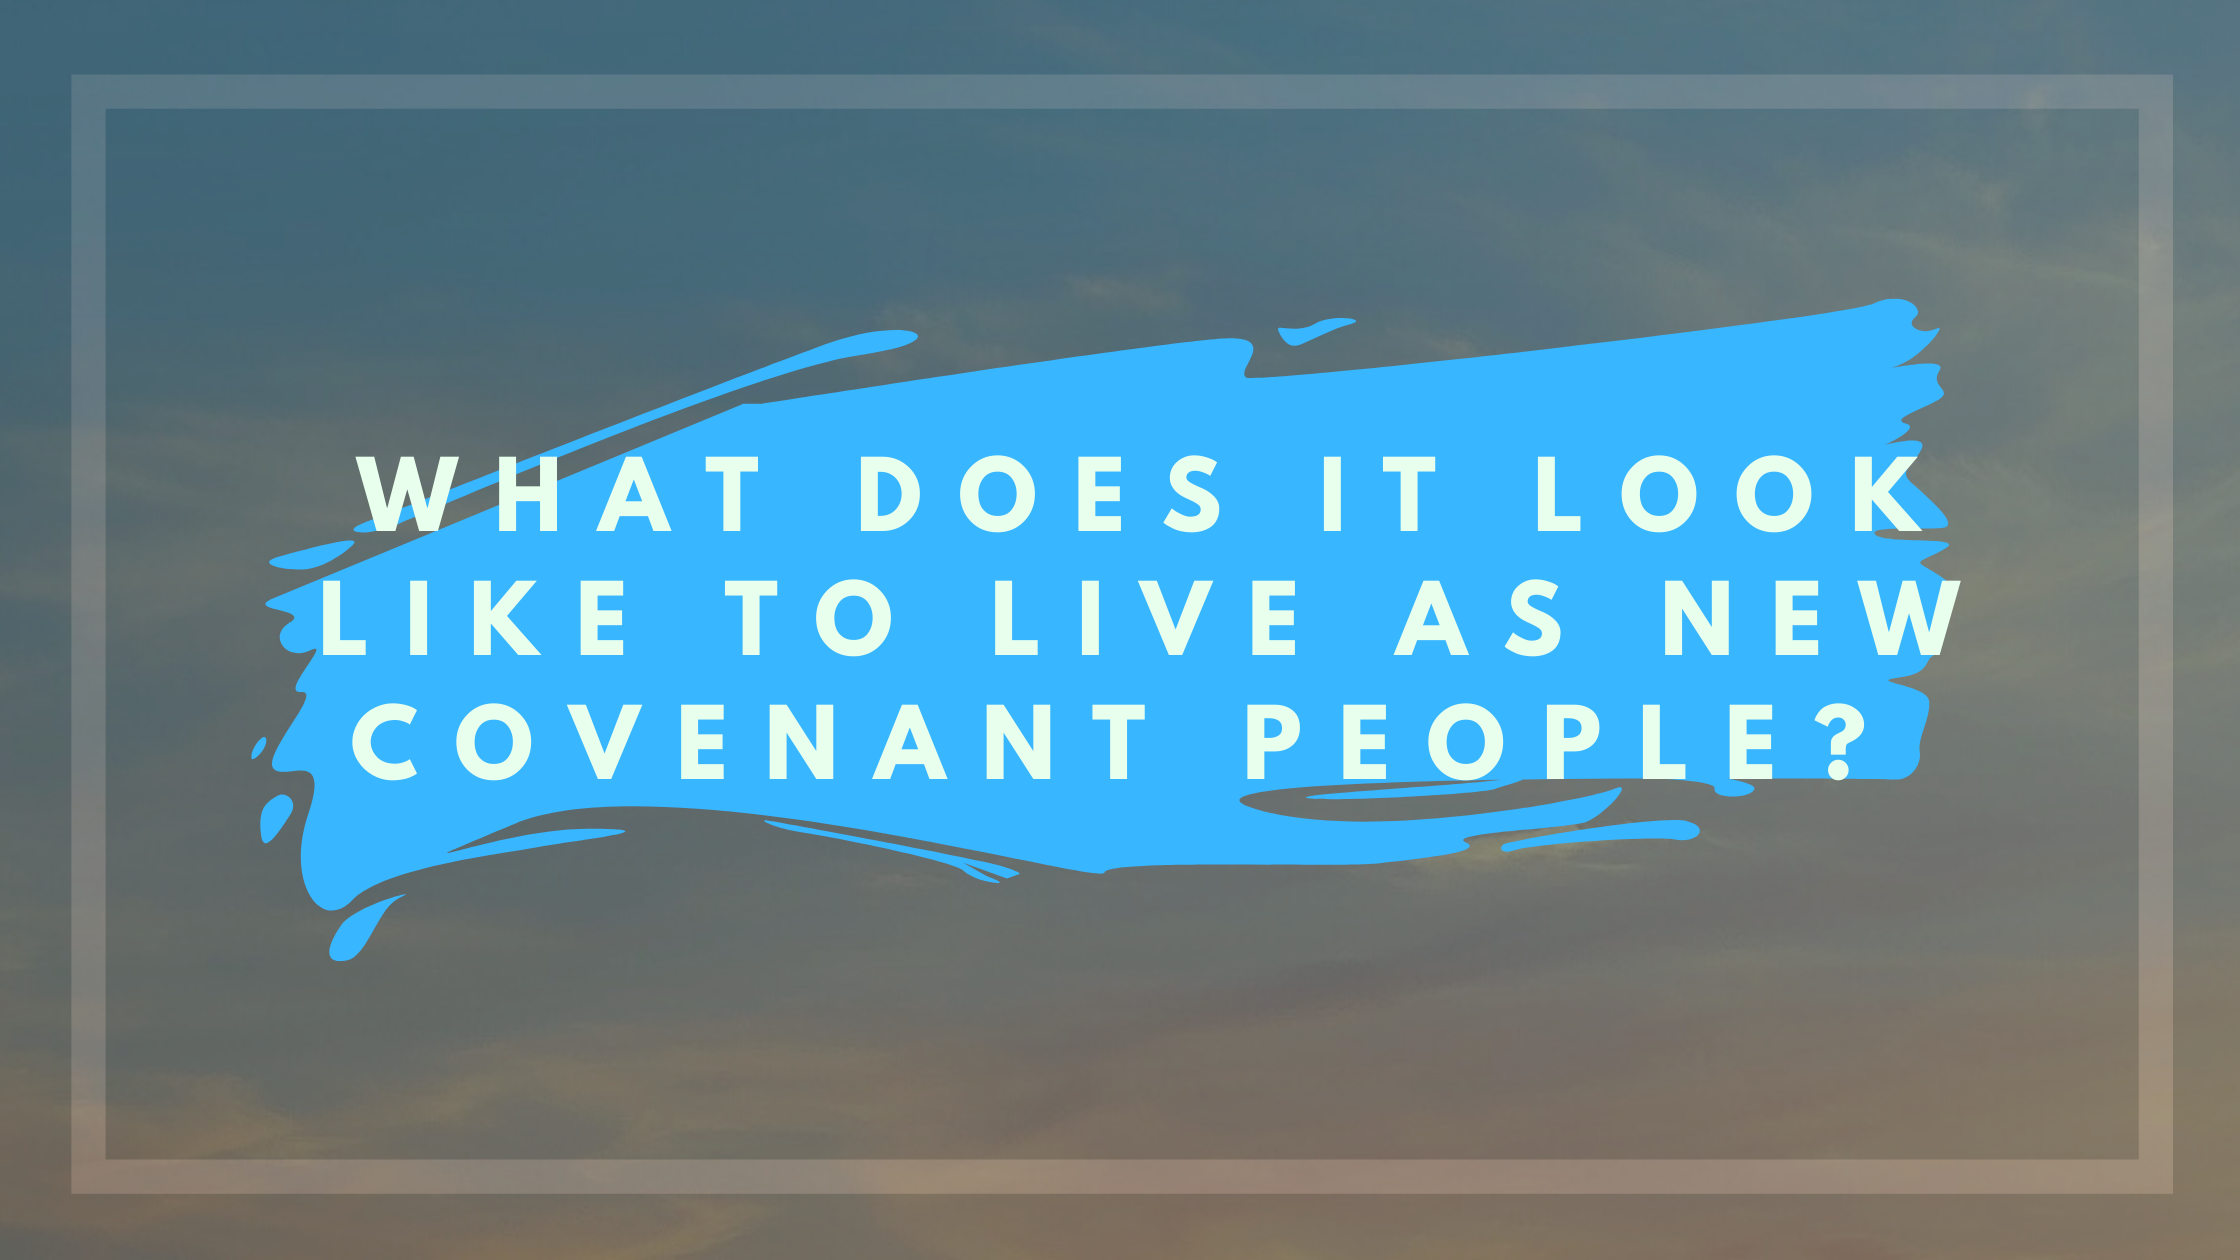 What does it look like to live as new covenant people?